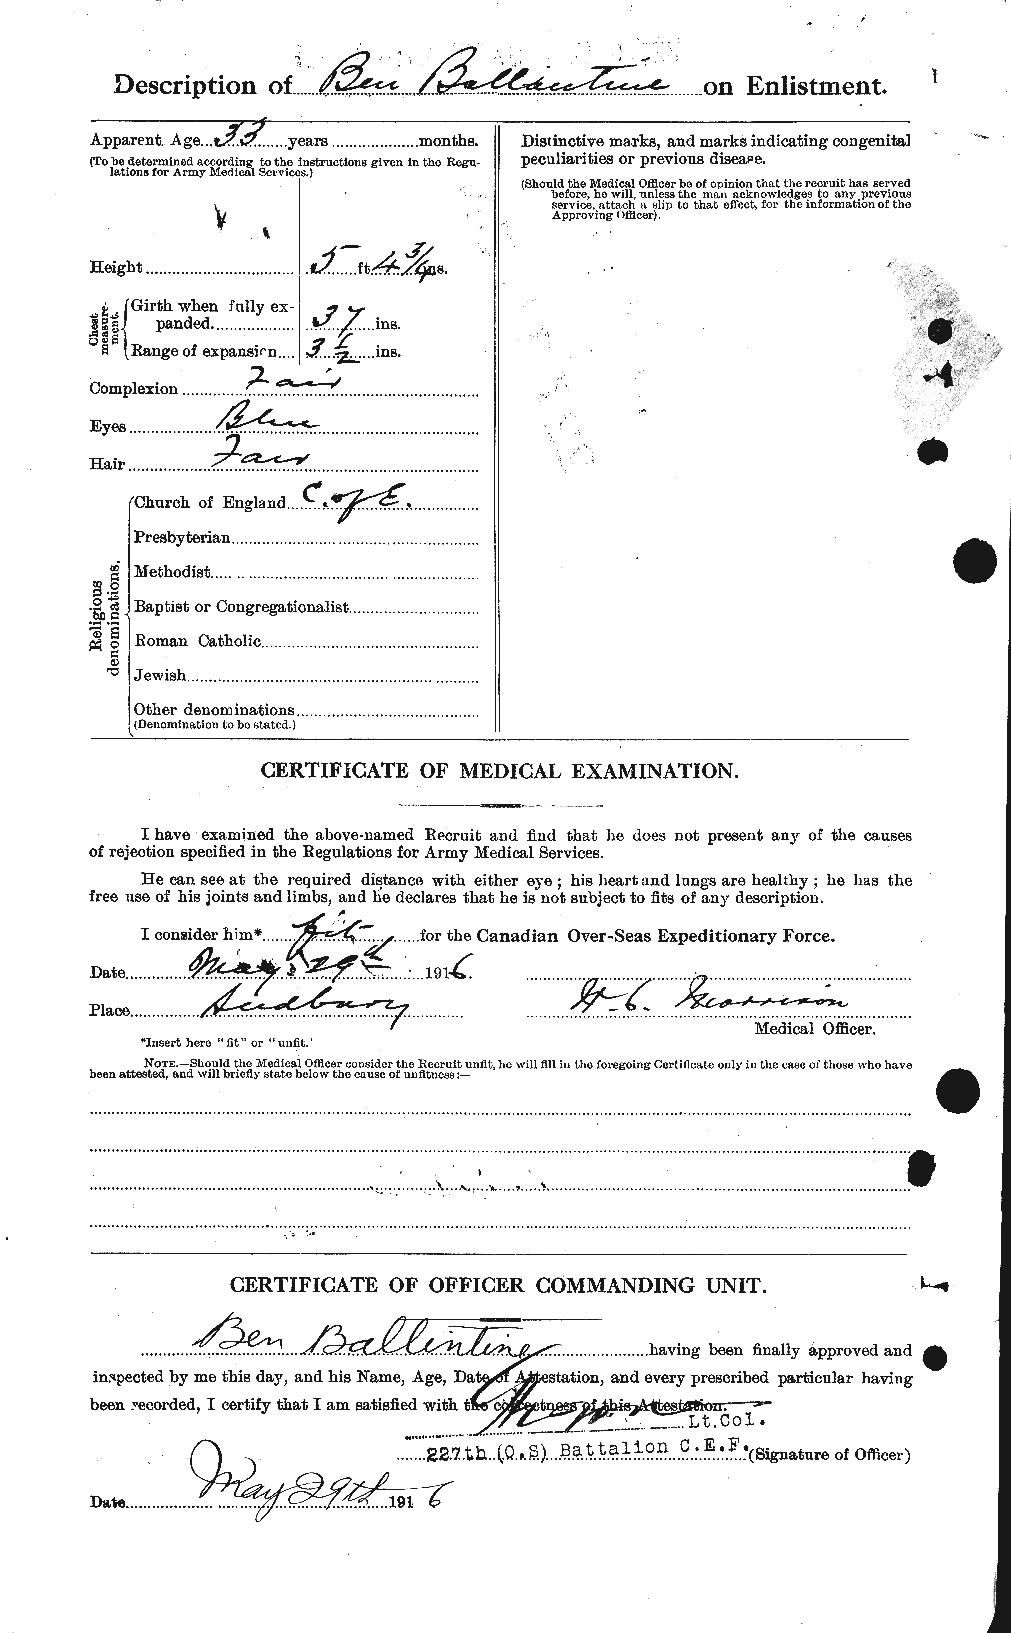 Personnel Records of the First World War - CEF 219631b